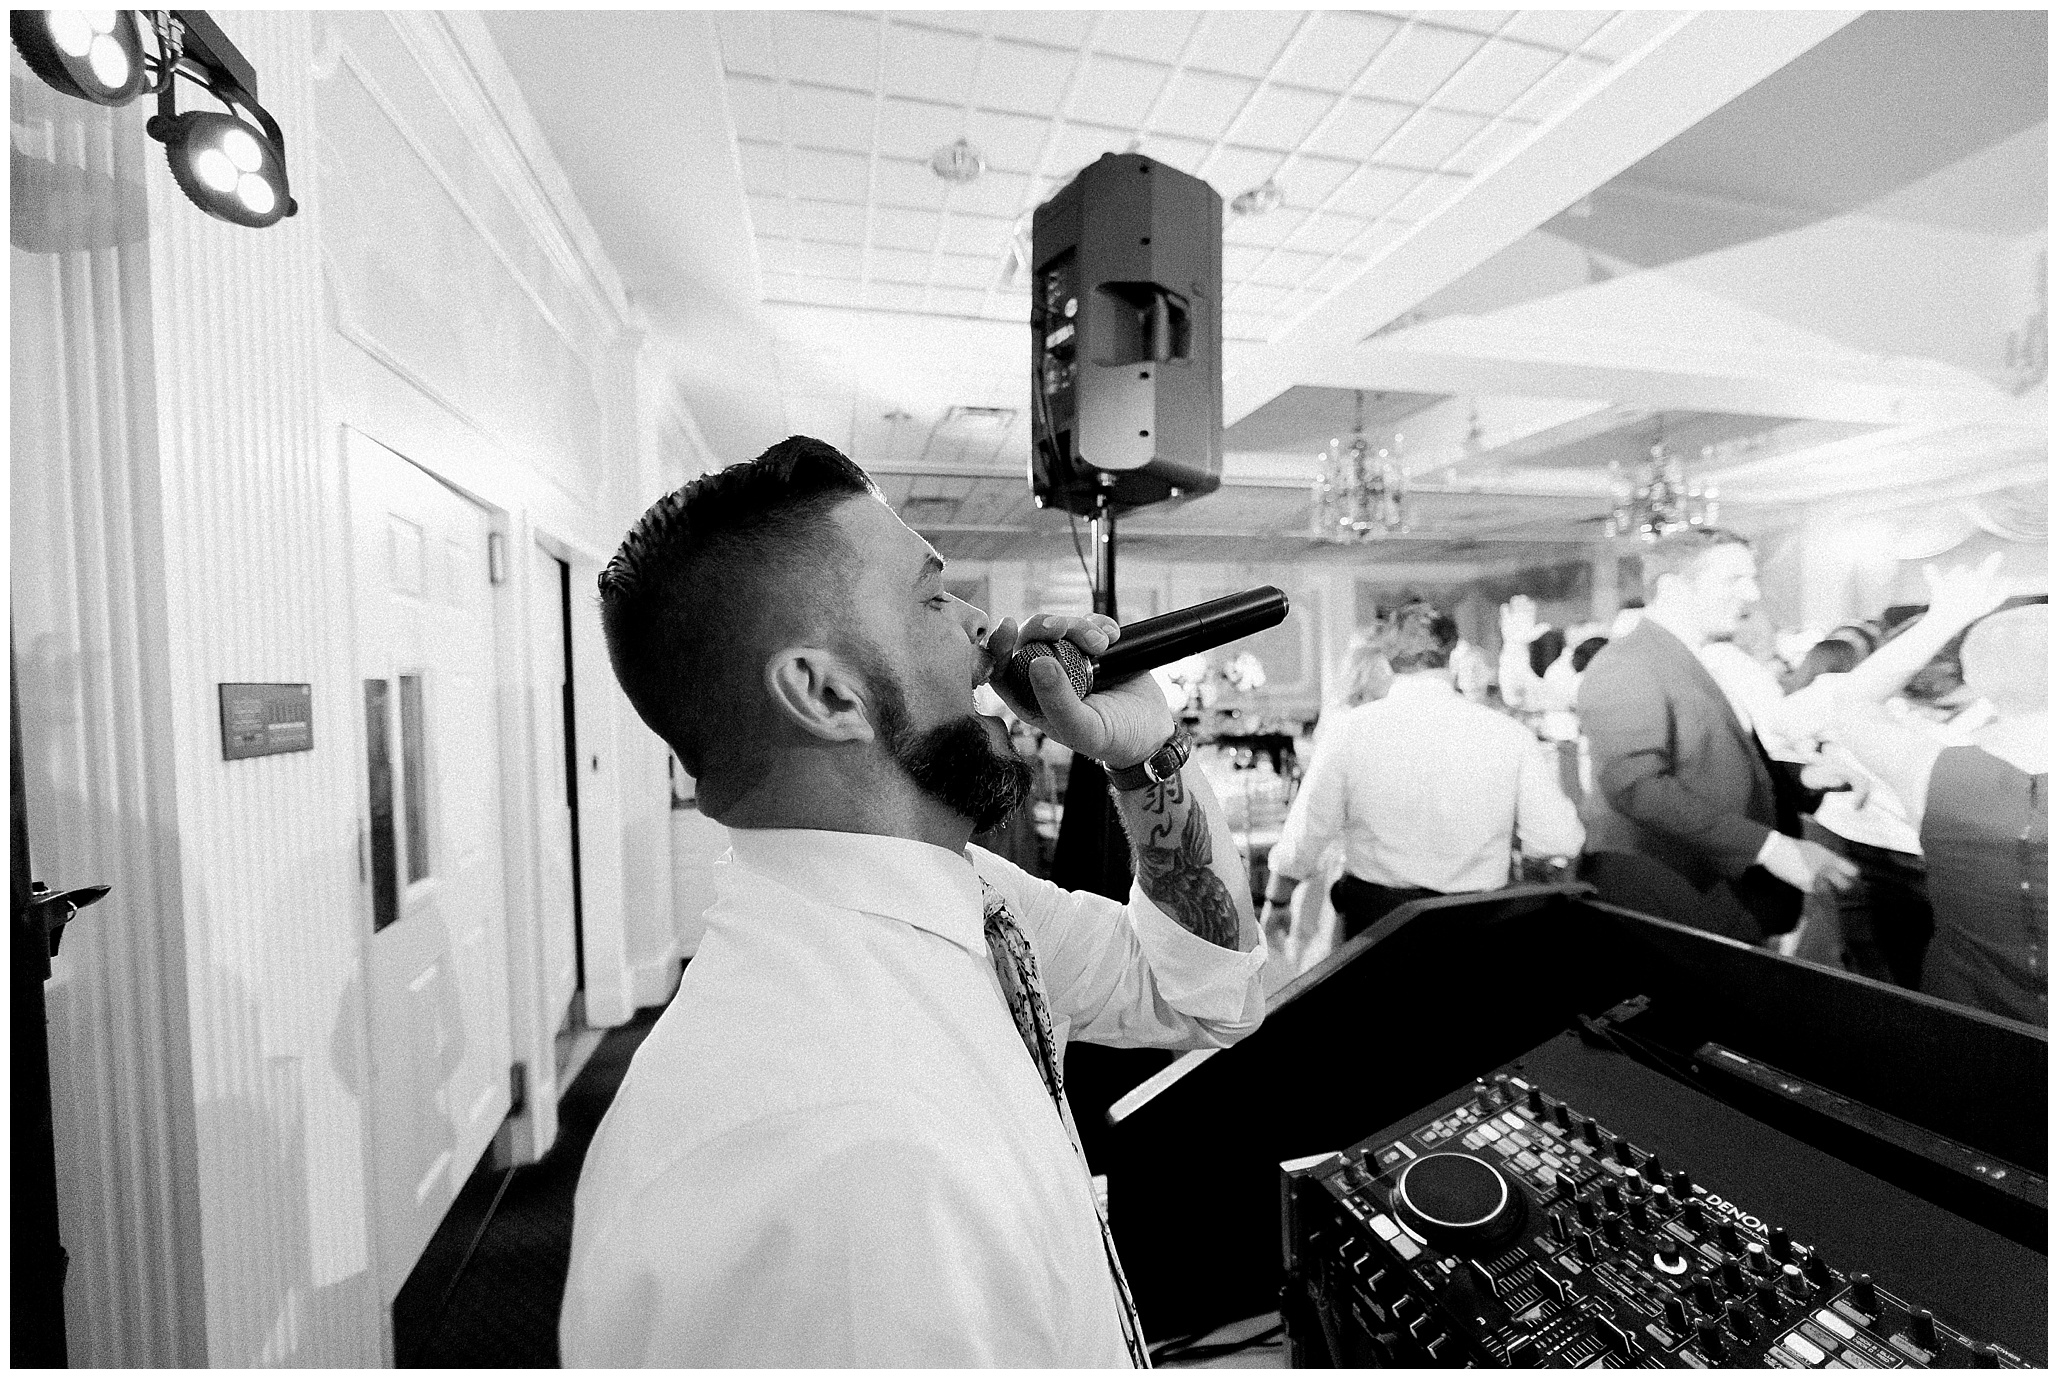 Top 5 Wedding Entertainment in Virginia recommended by Luke and Ashley Photography